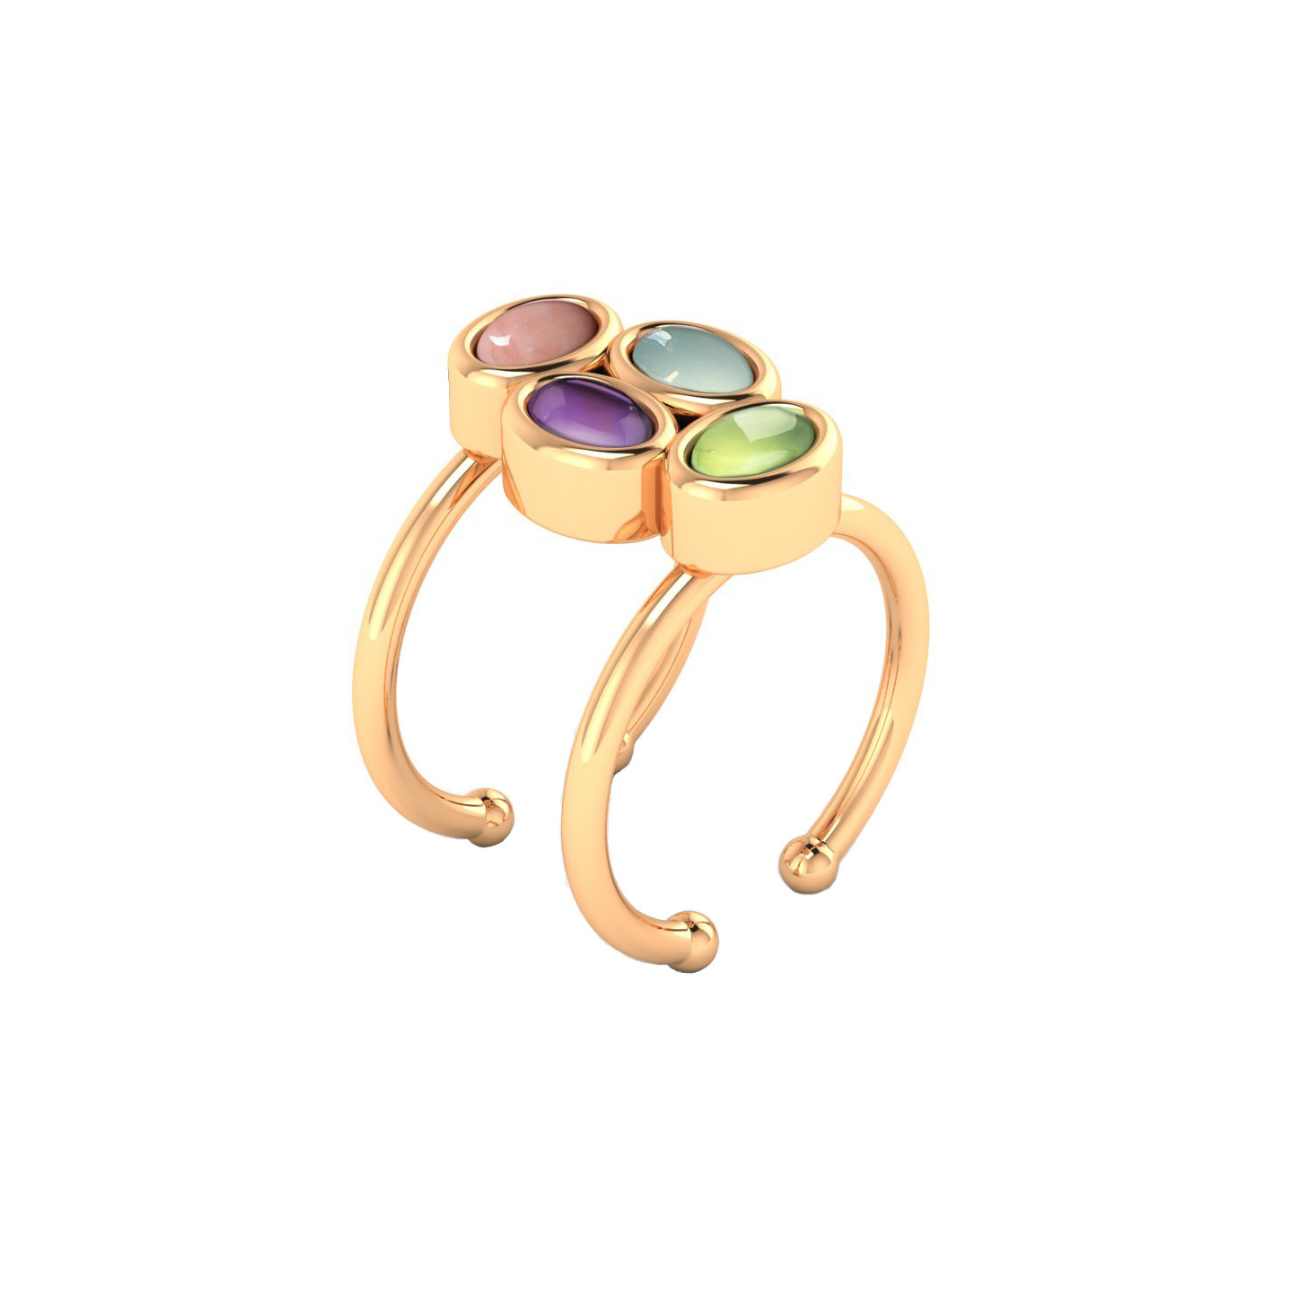 Bauble ring 18k gold